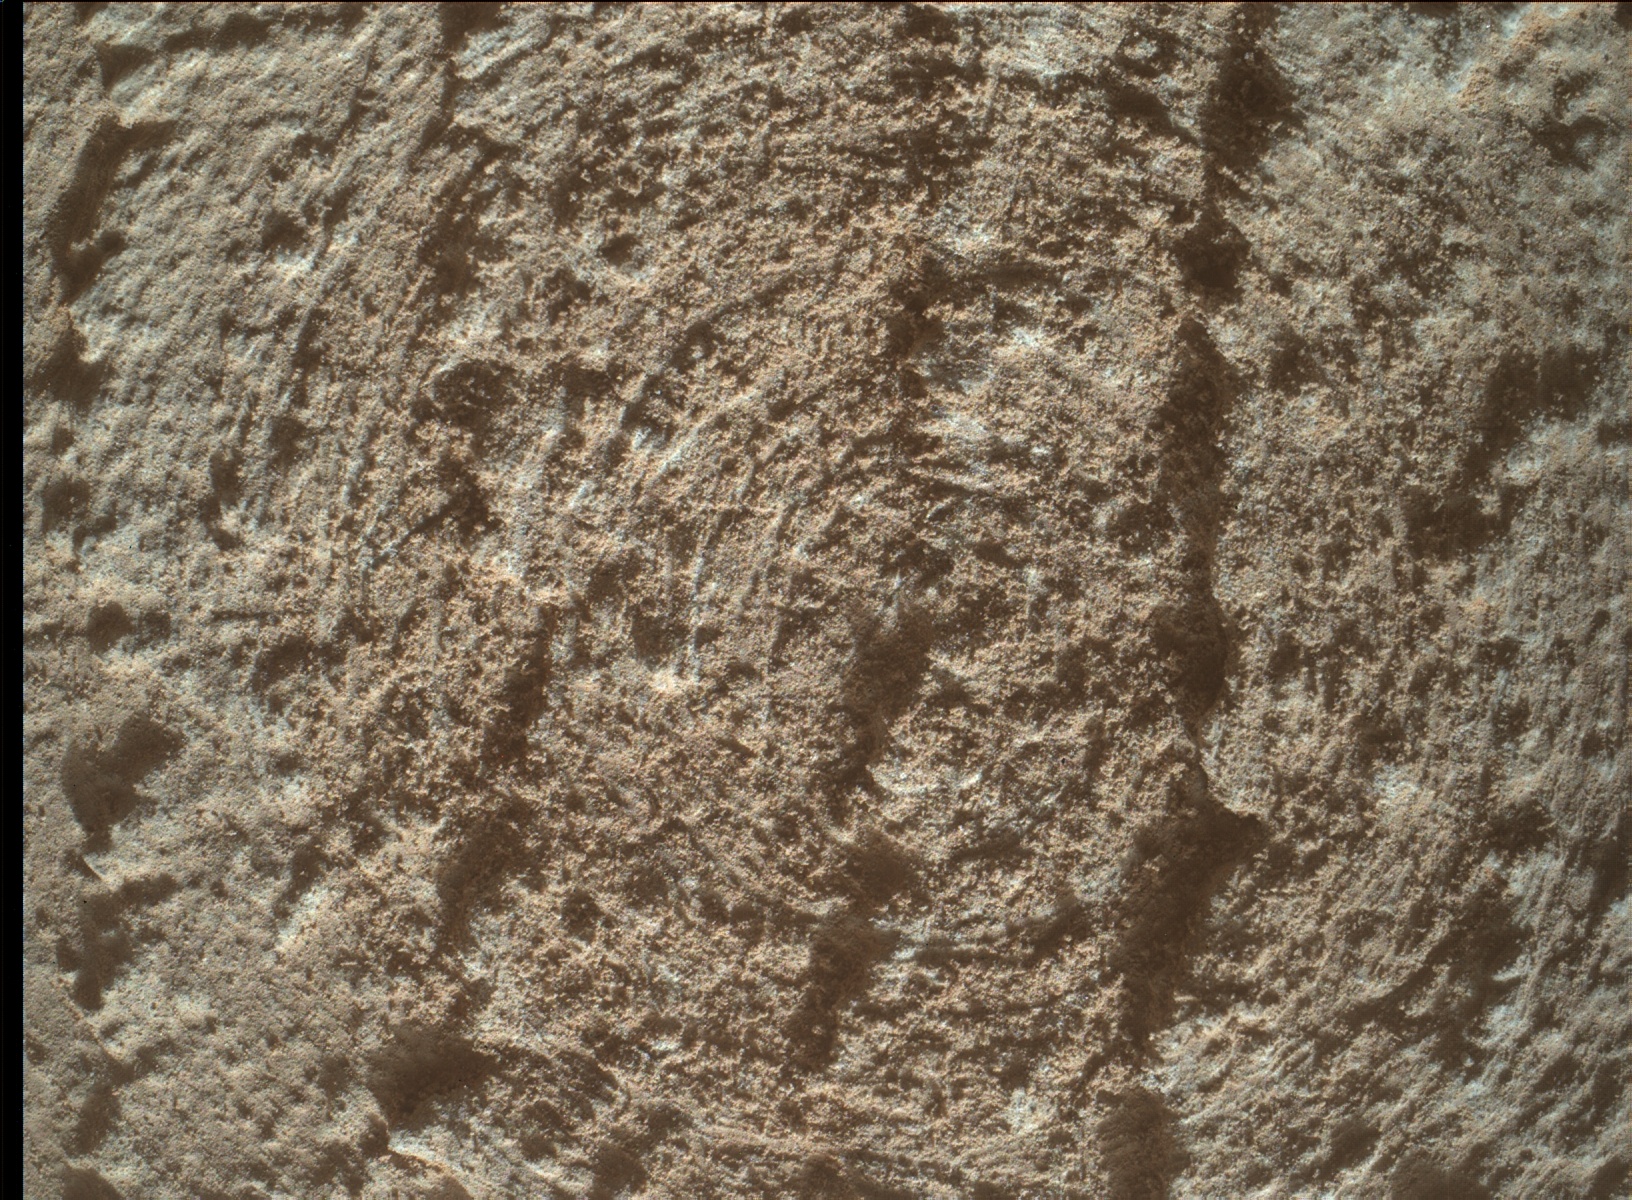 Nasa's Mars rover Curiosity acquired this image using its Mars Hand Lens Imager (MAHLI) on Sol 3773